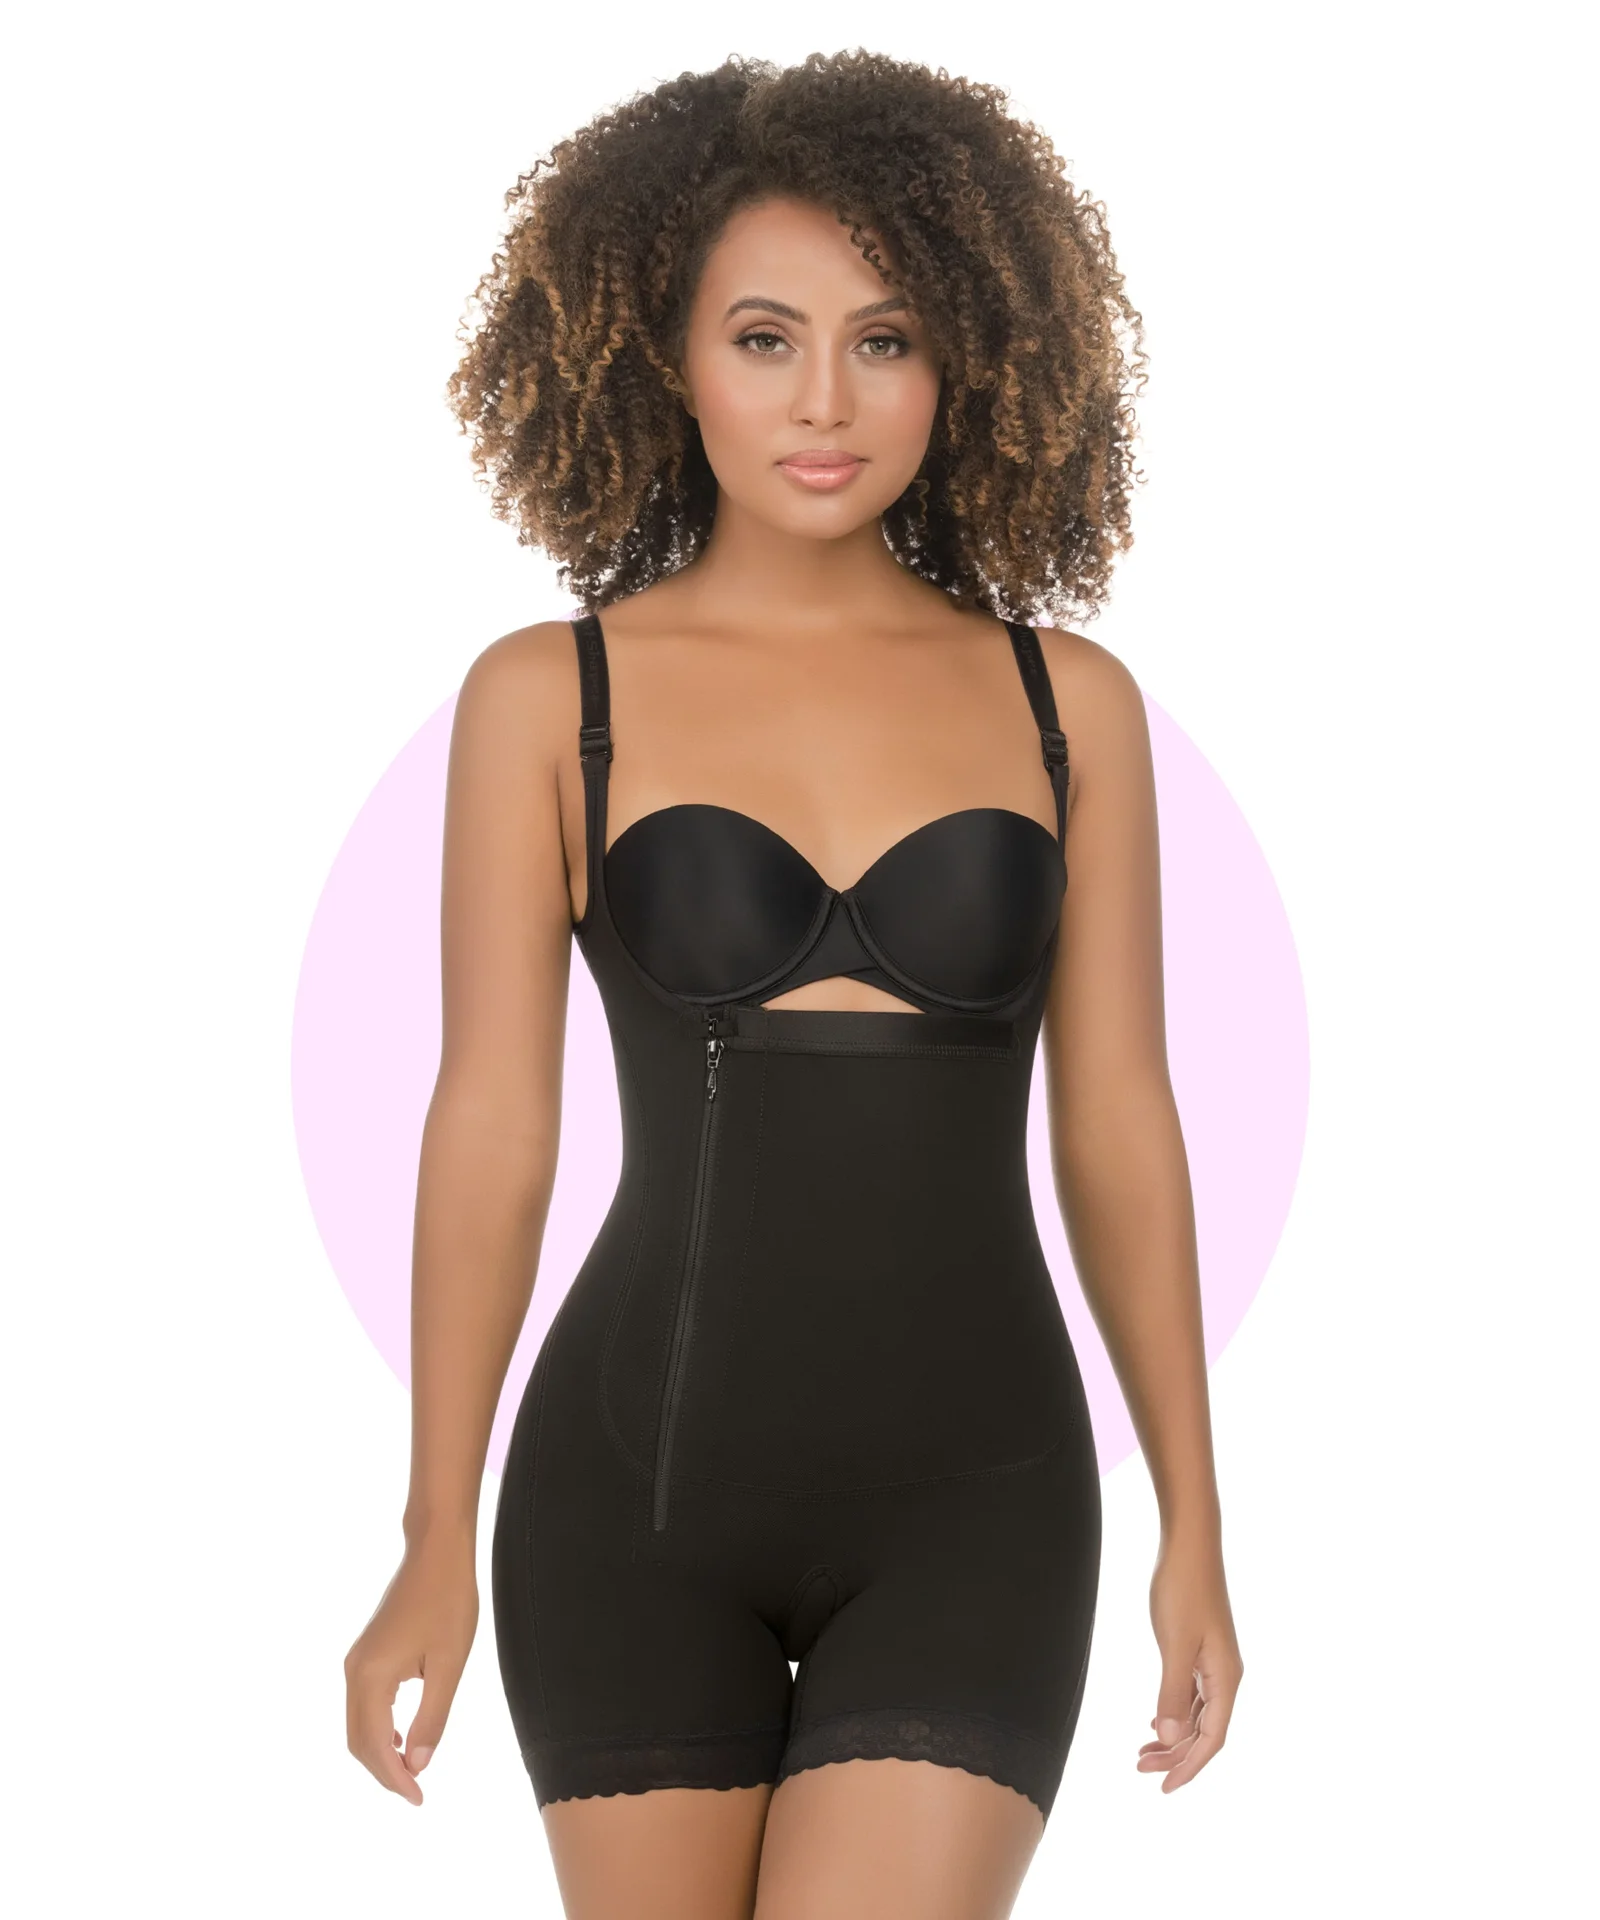 The perfect Match: Seamless shapewear + push up jeans — CYSM Shapers